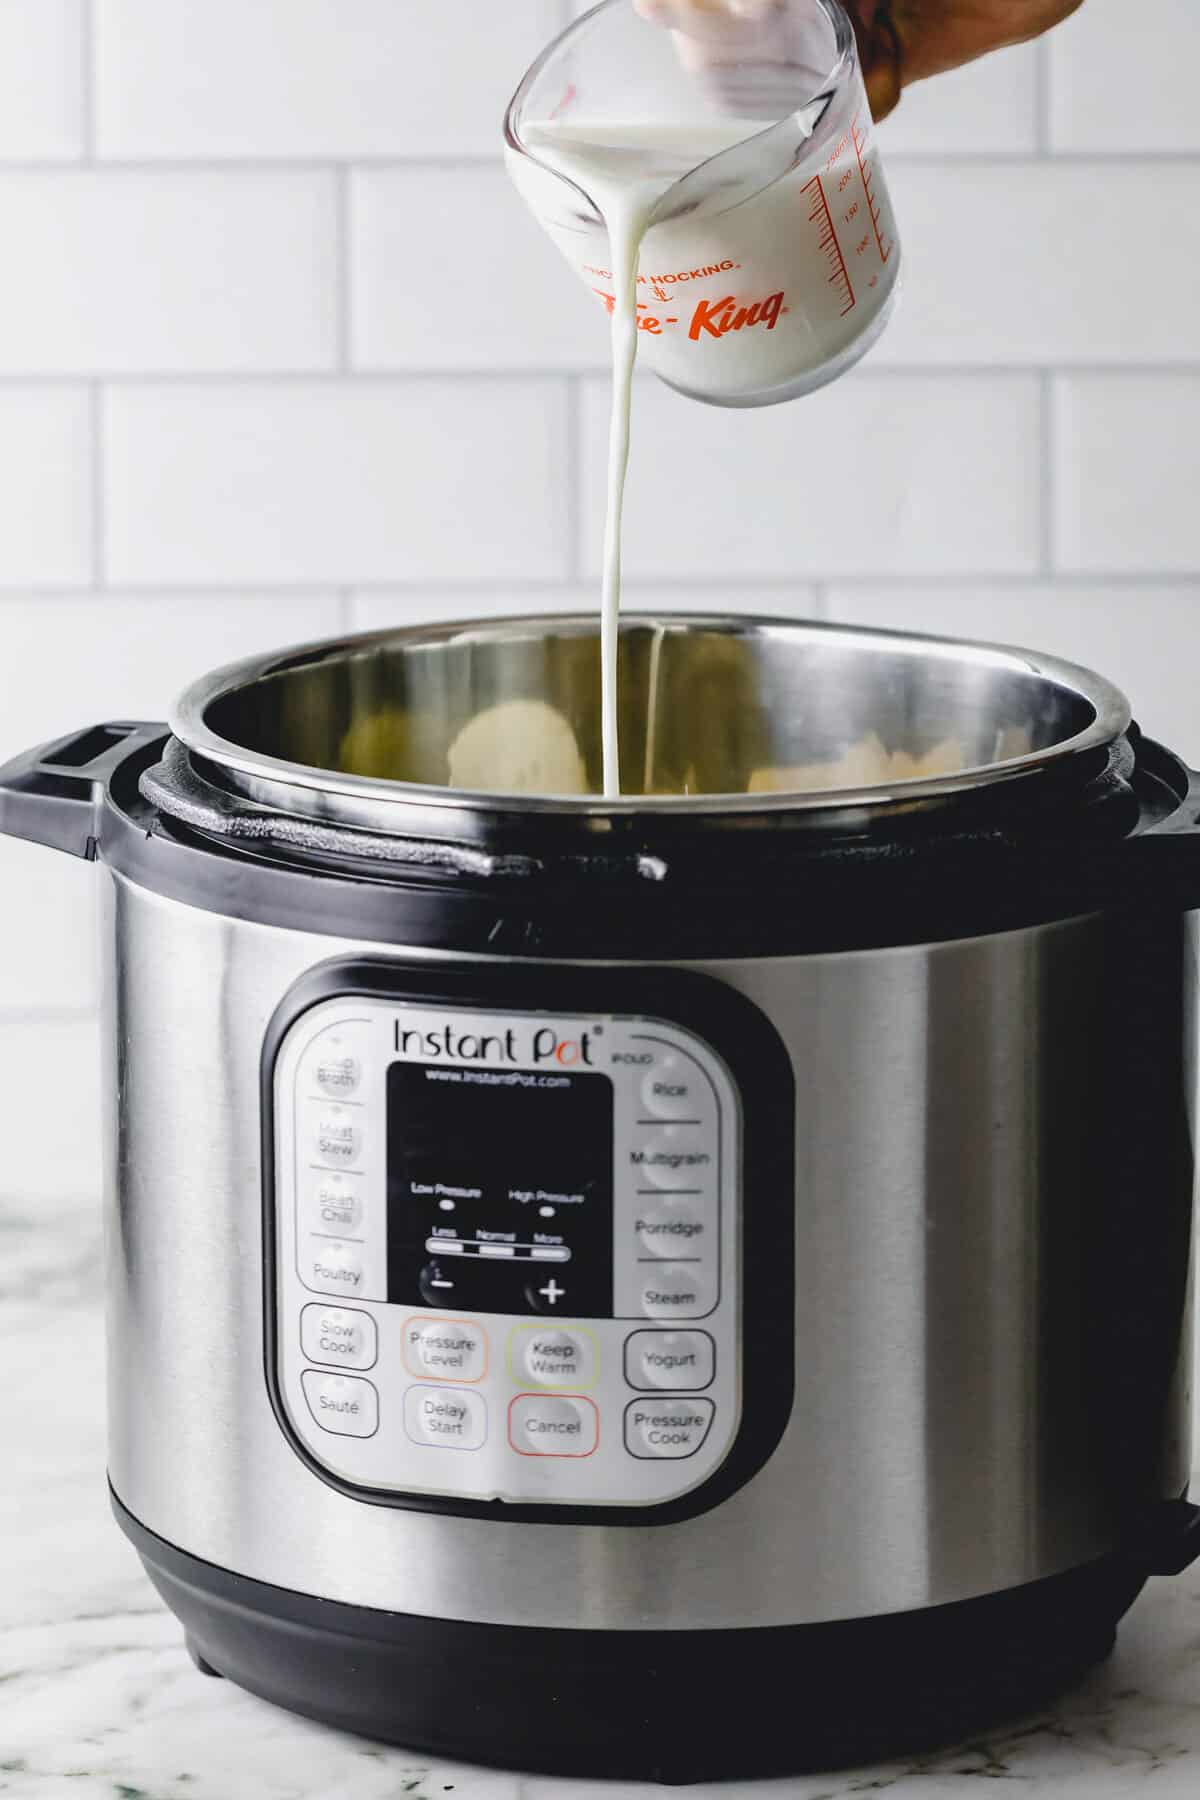 Side angle showing milk being added to Instant Pot.